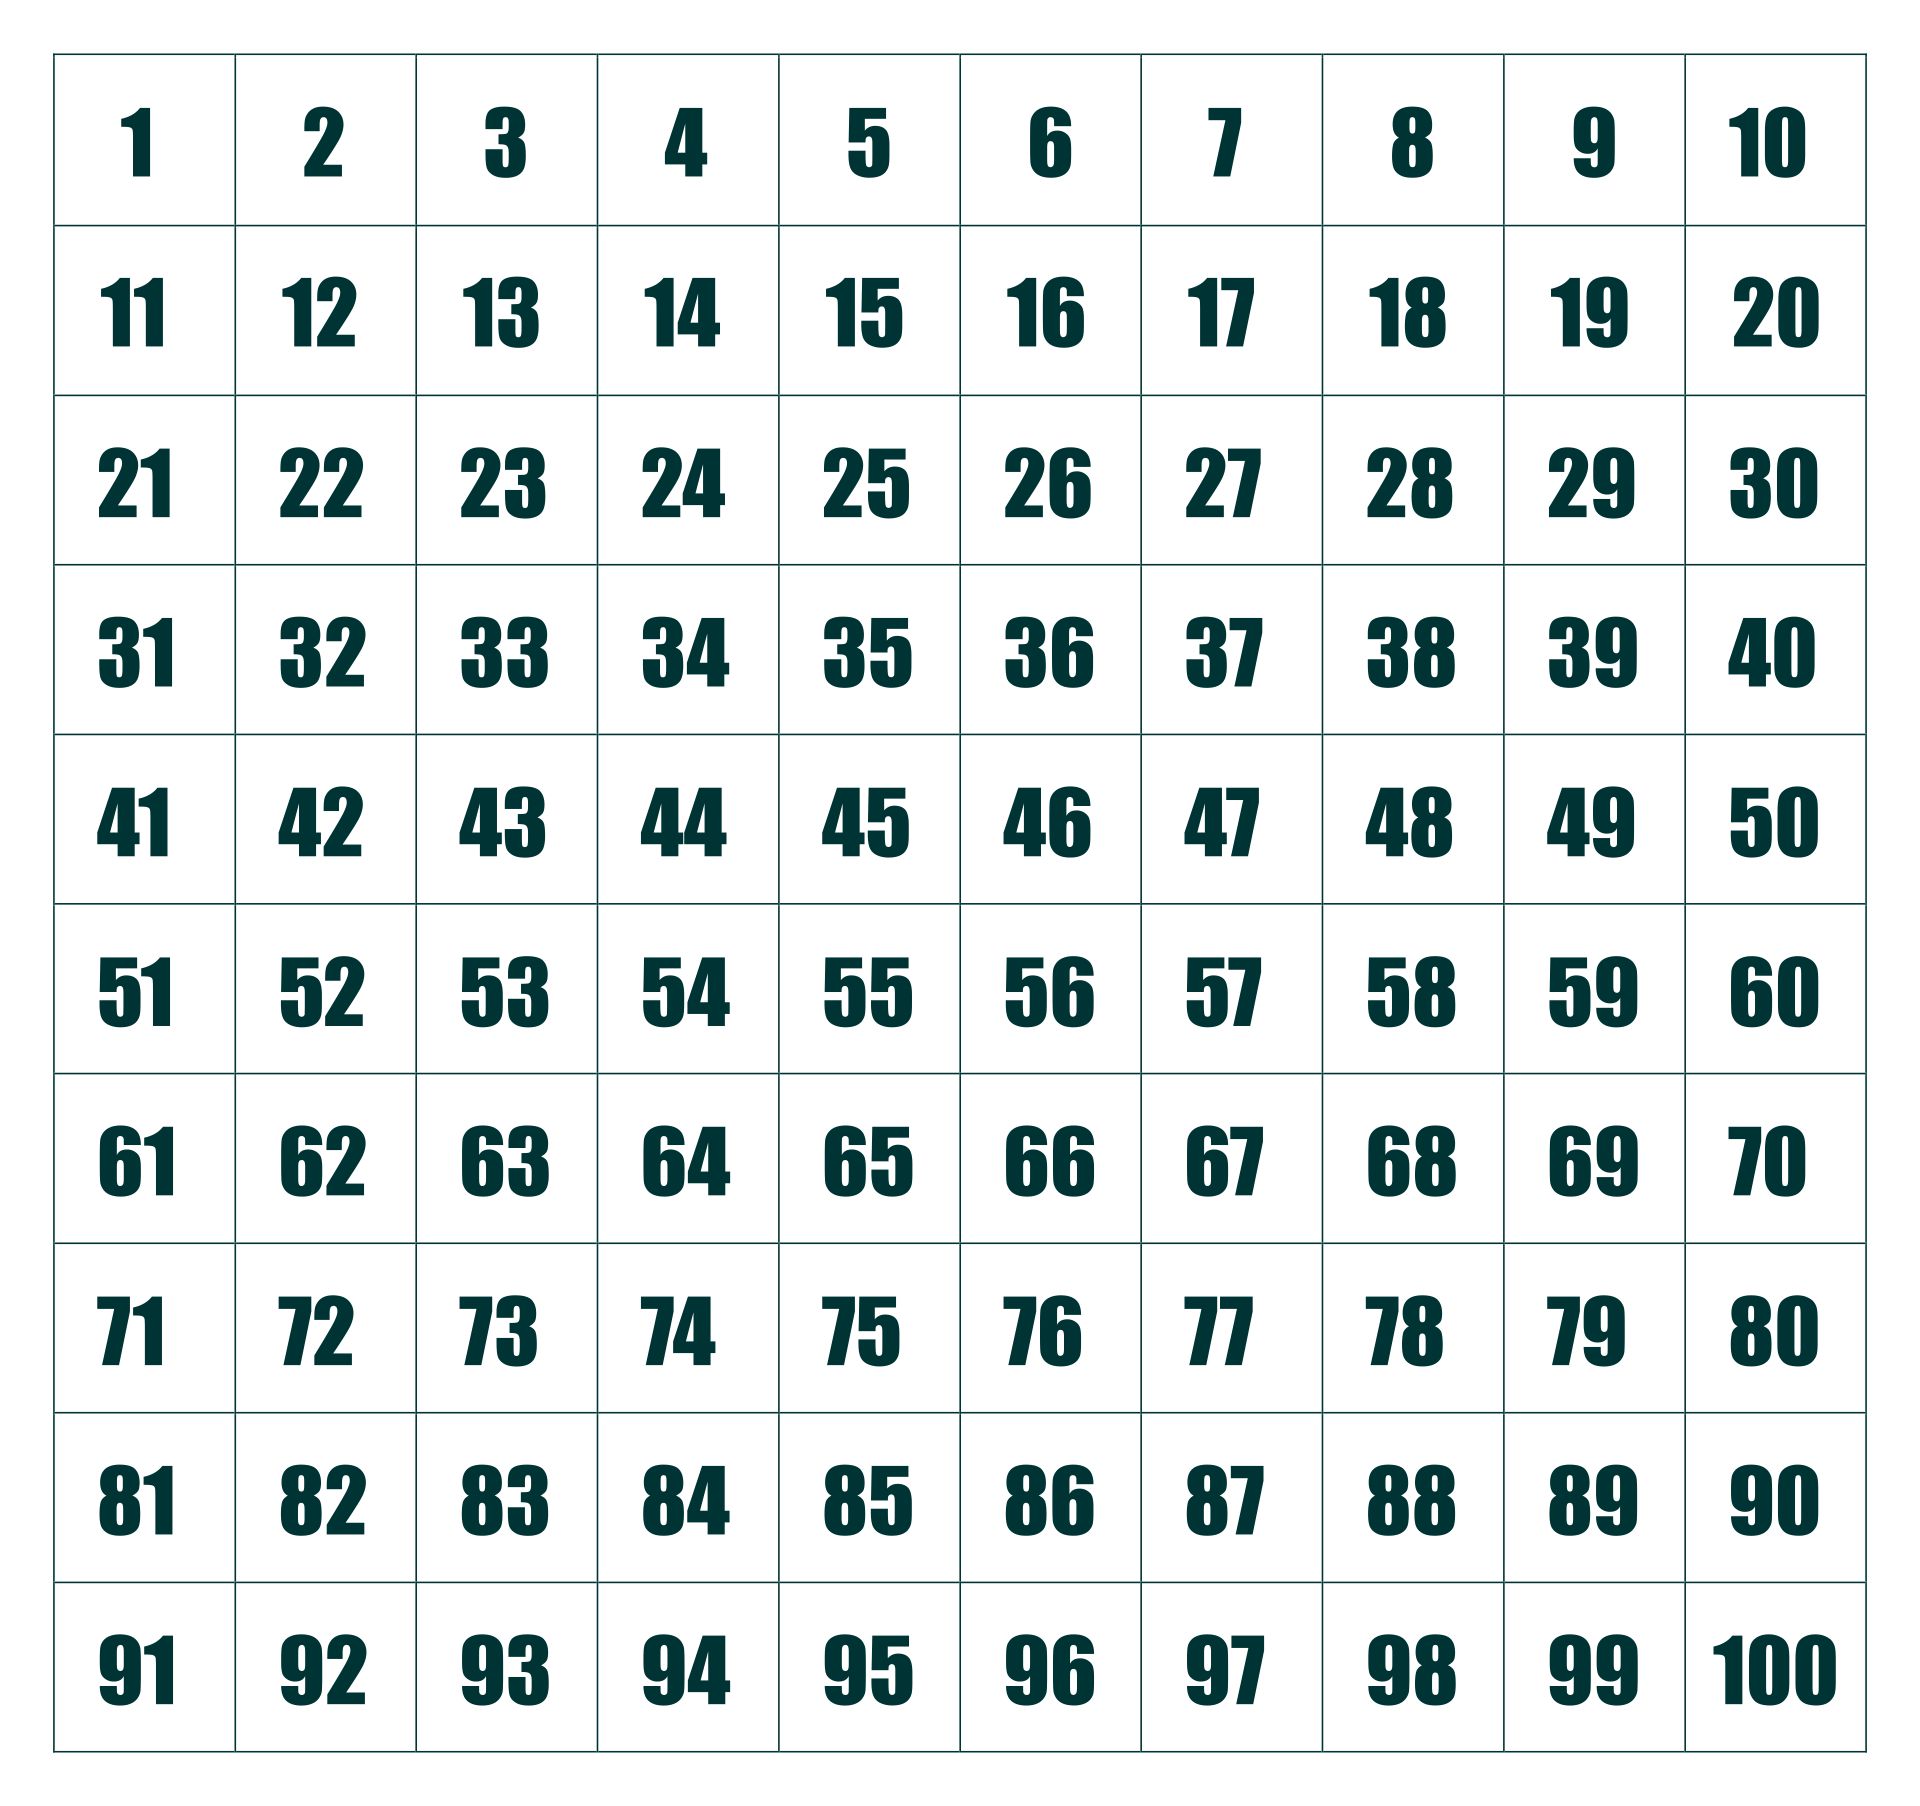 7 Best Images Of Printable 100 Square Grid Grid With 100 Squares Printable Blank 100 Square 